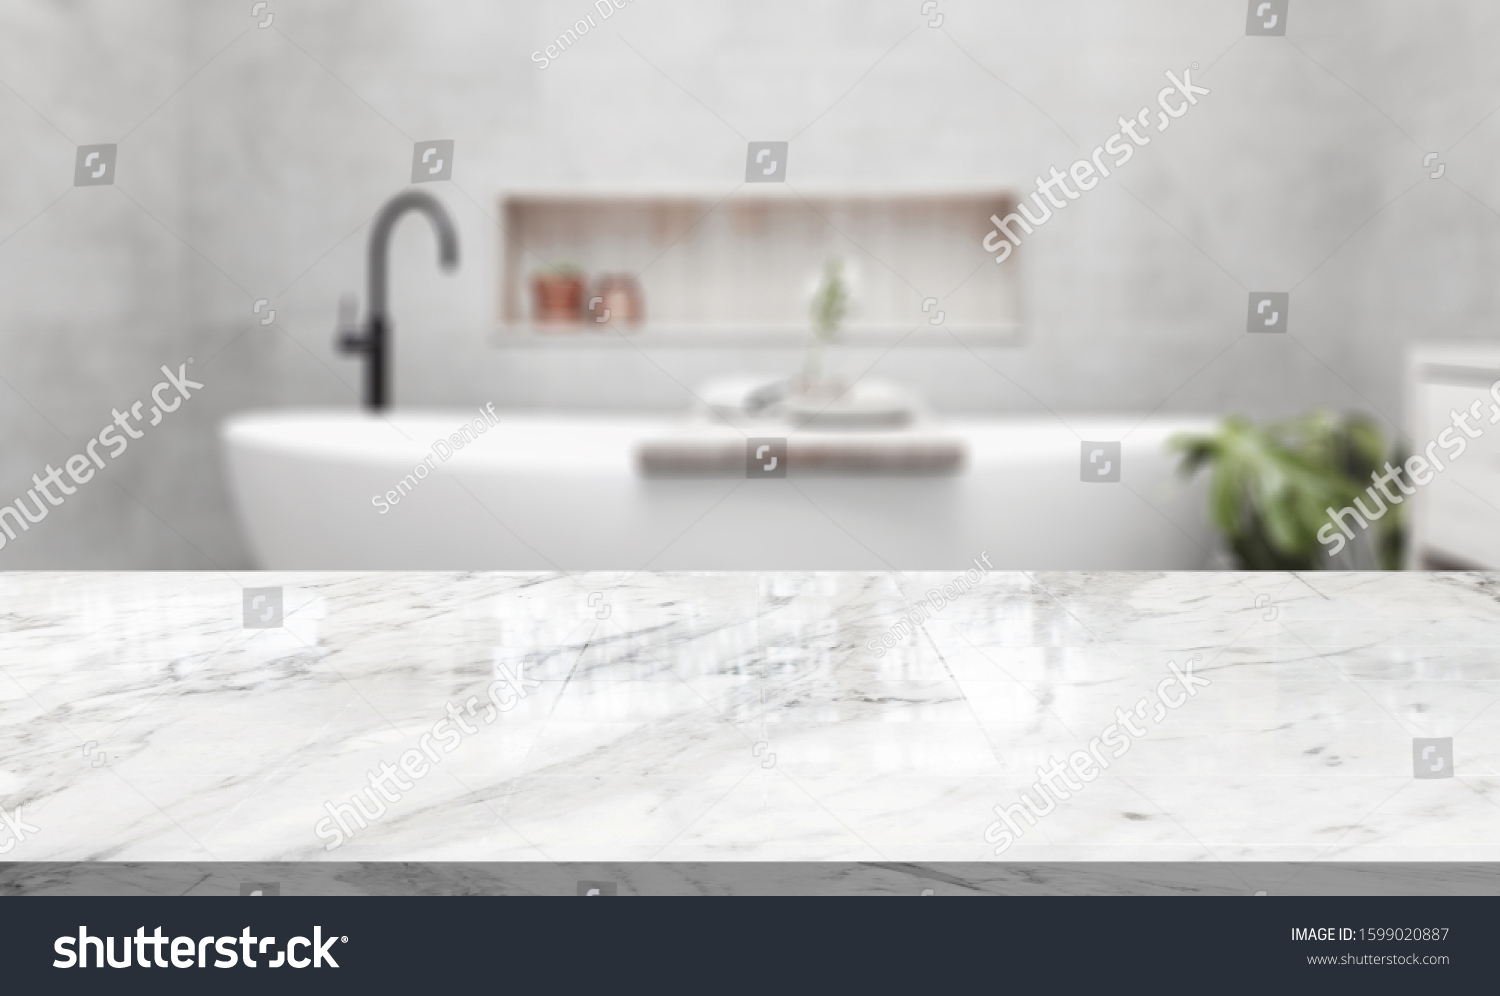 Table Top And Blur Bathroom Of The Background #1599020887